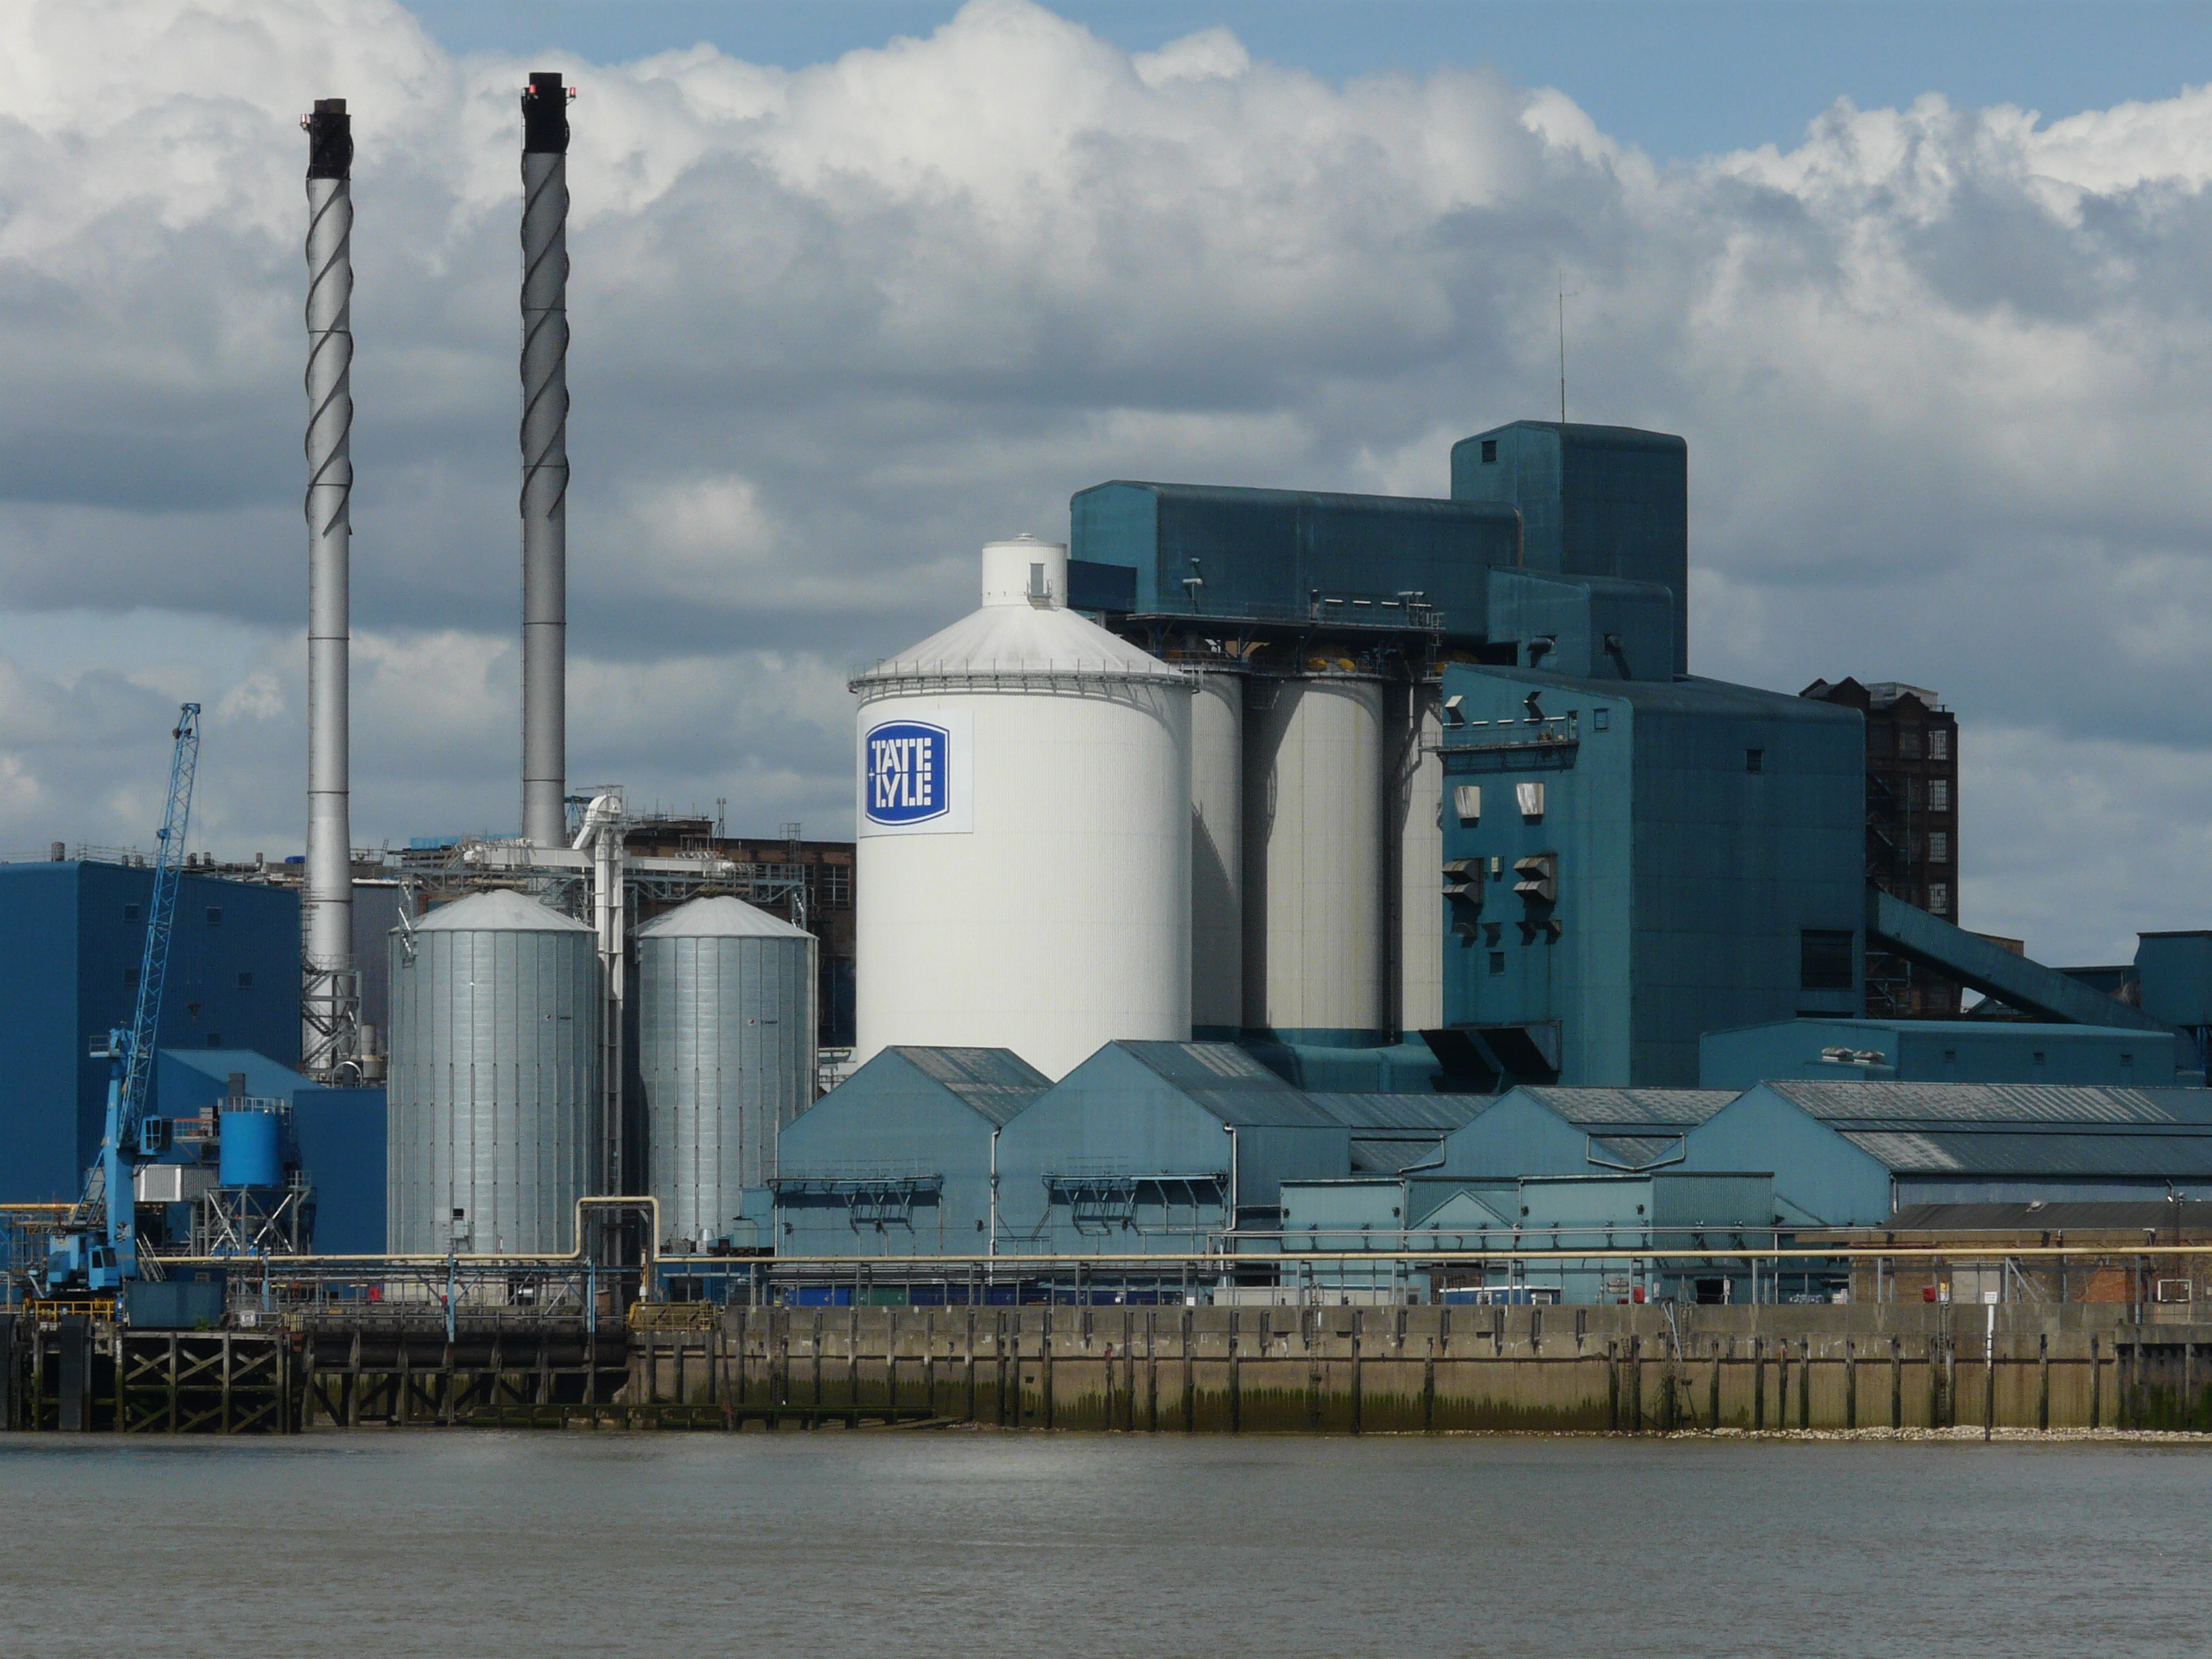 Tate and Lyle sugar refinery